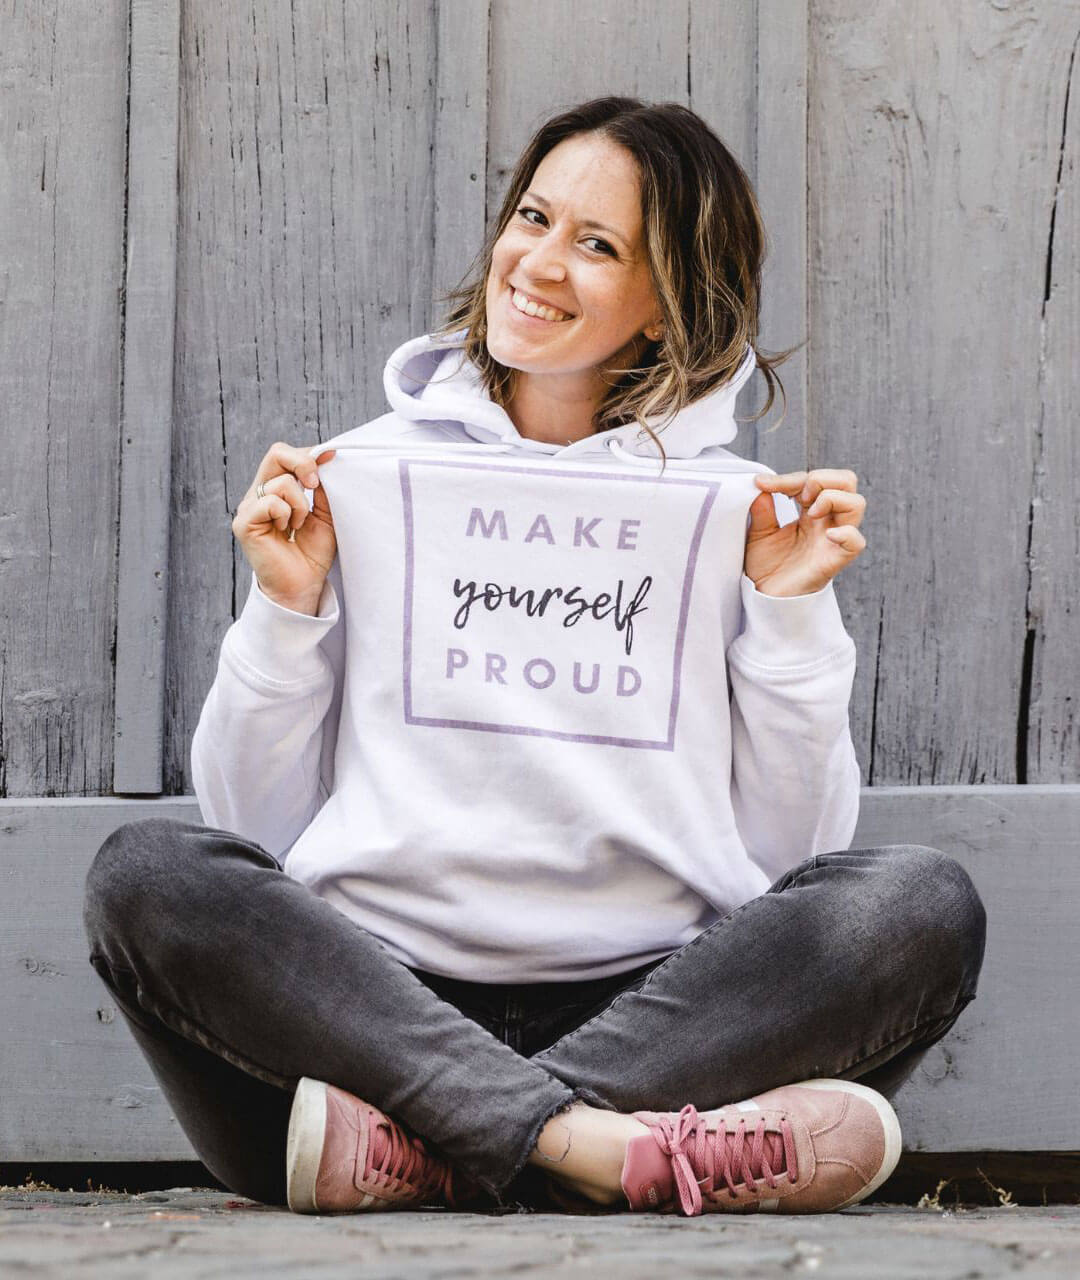 Steph mit Pullover "Make yourself proud"